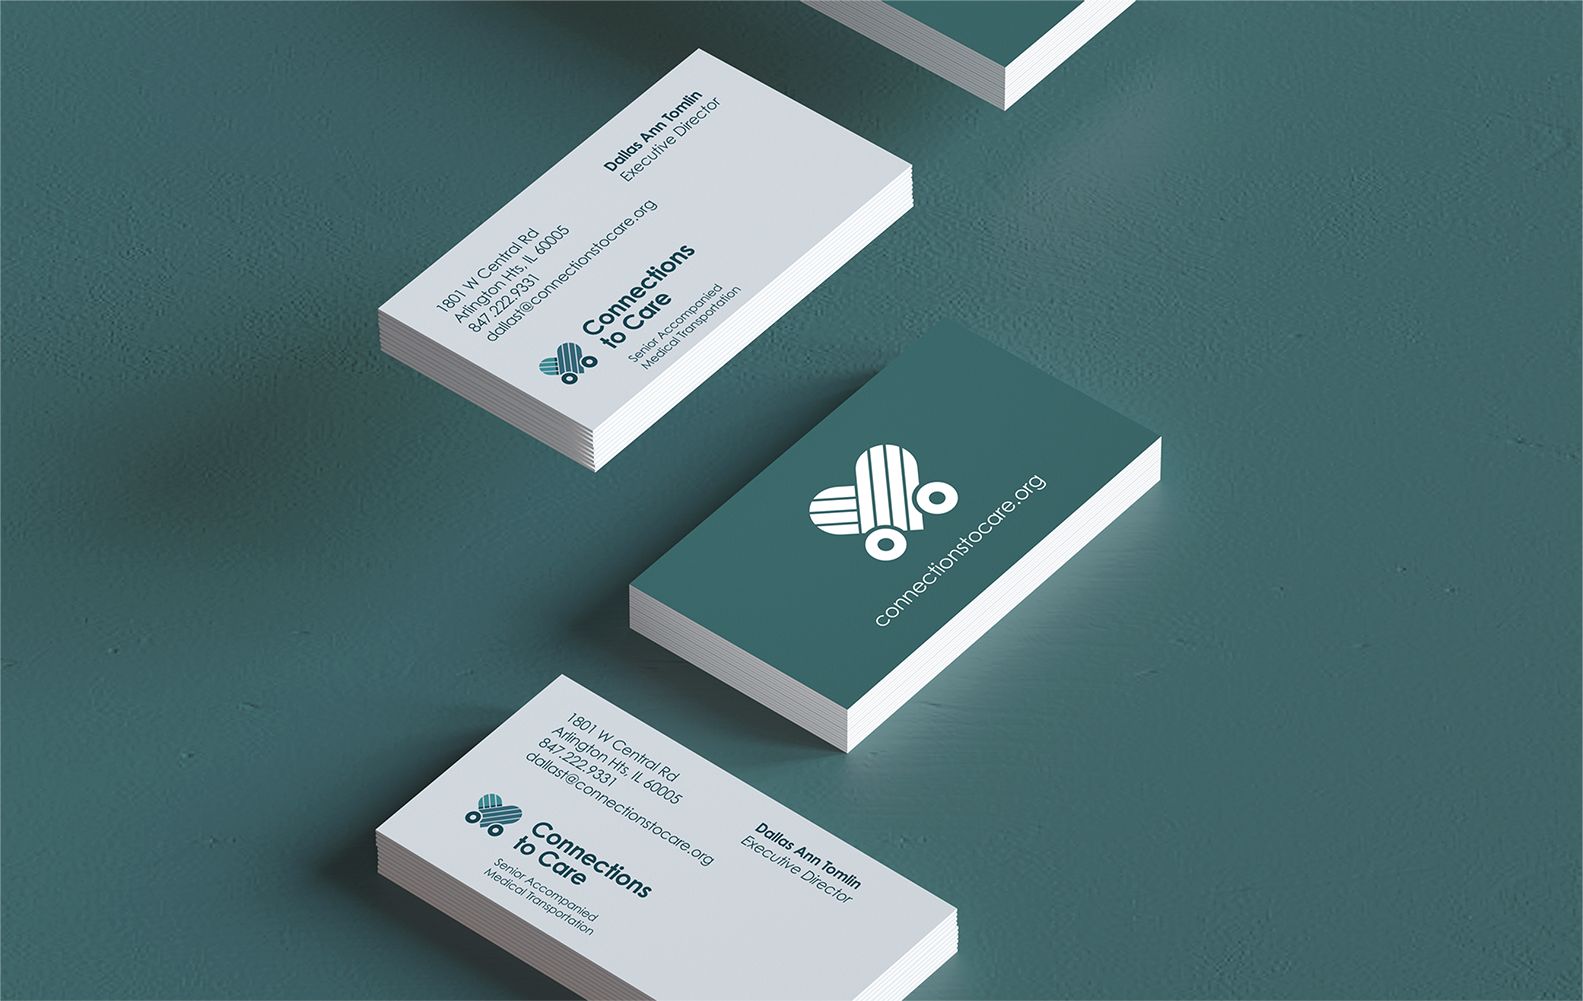 Connections to Care business cards